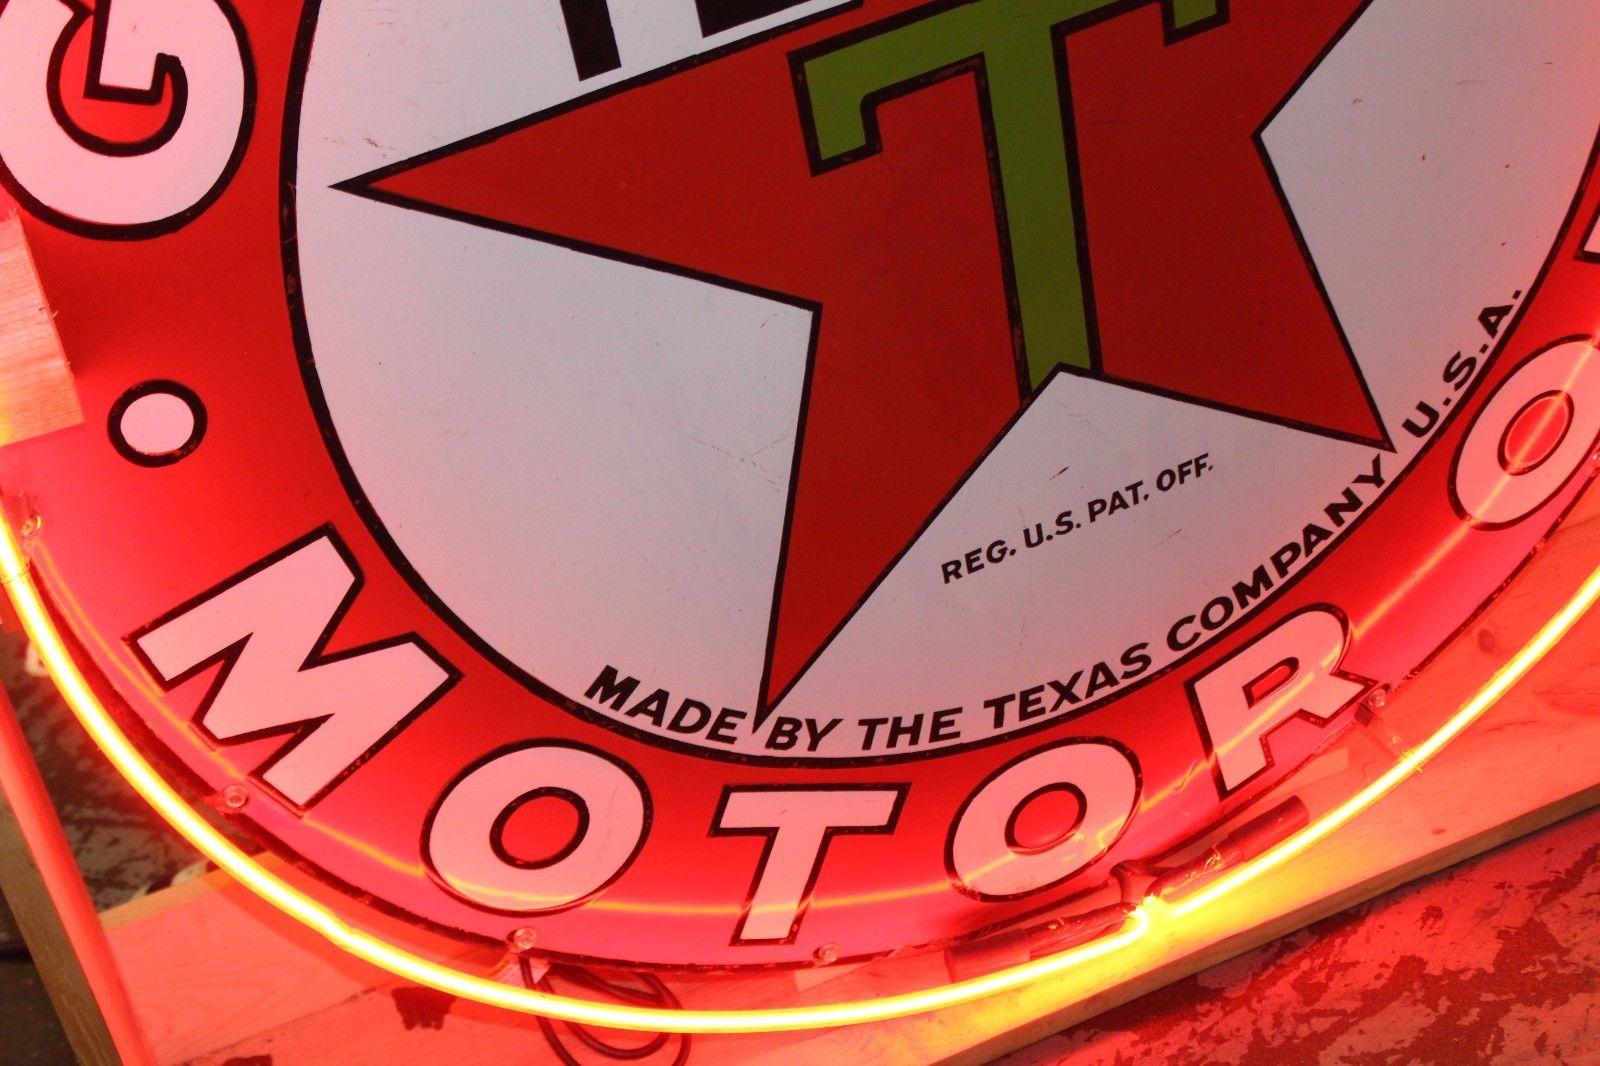 Texaco neon sign perfect for any collection. This sign has neon tubing that's made to light up the sign.